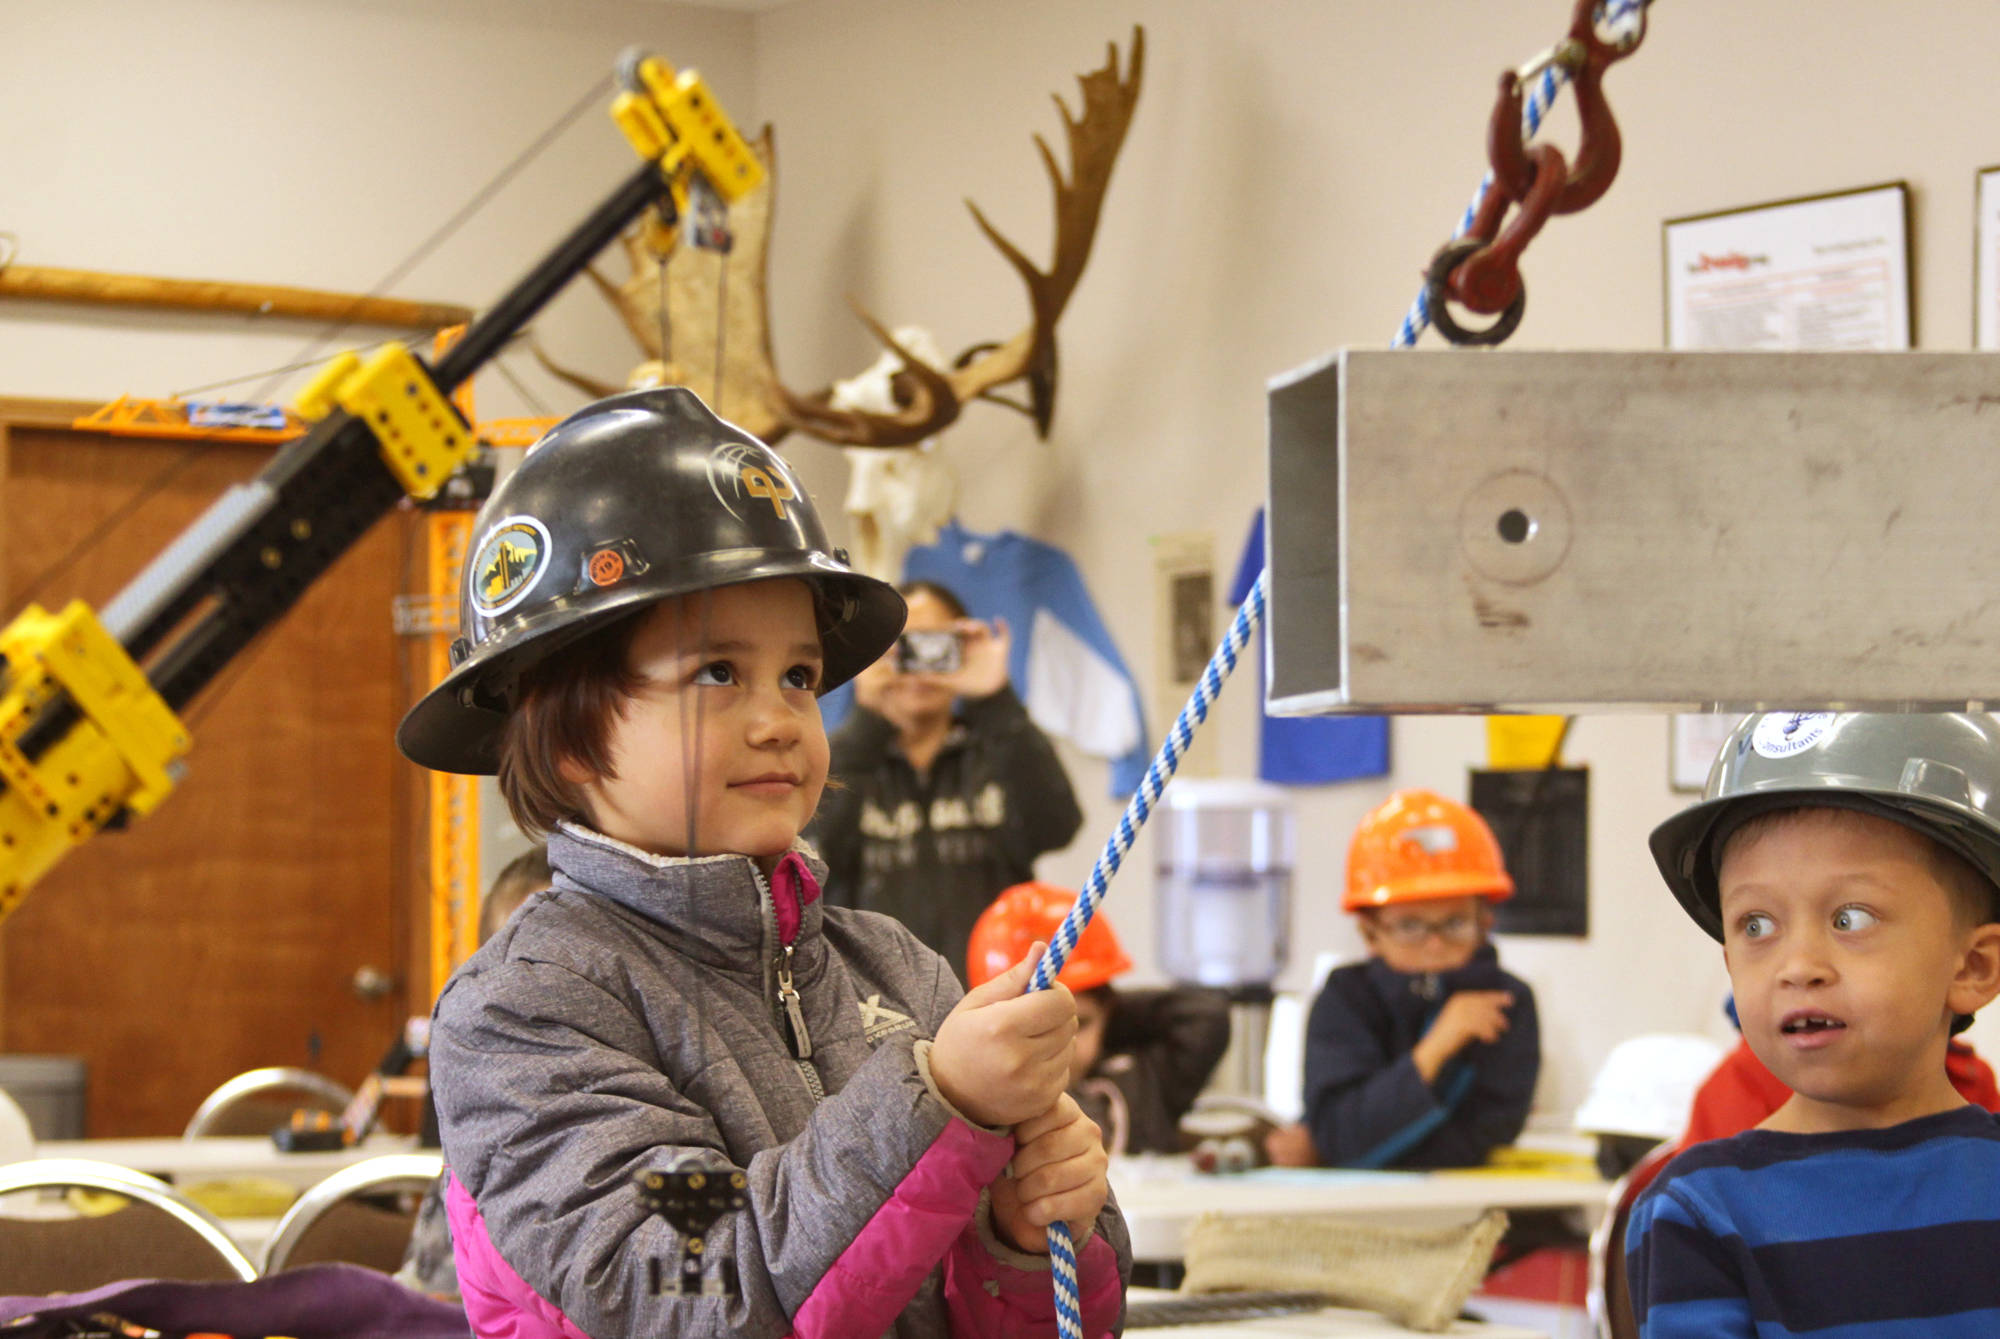 Kalifornsky Beach Elementary first-graders Melanie Partridge (left) and Aidan Gilliam serve as tagline holders, steadying a beam being lifted by a shop crane during their class’ field trip to Alaska Crane Consultants on Monday, May 7, 2018 on Kalifornsky Beach road. (Ben Boettger/Peninsula Clarion)